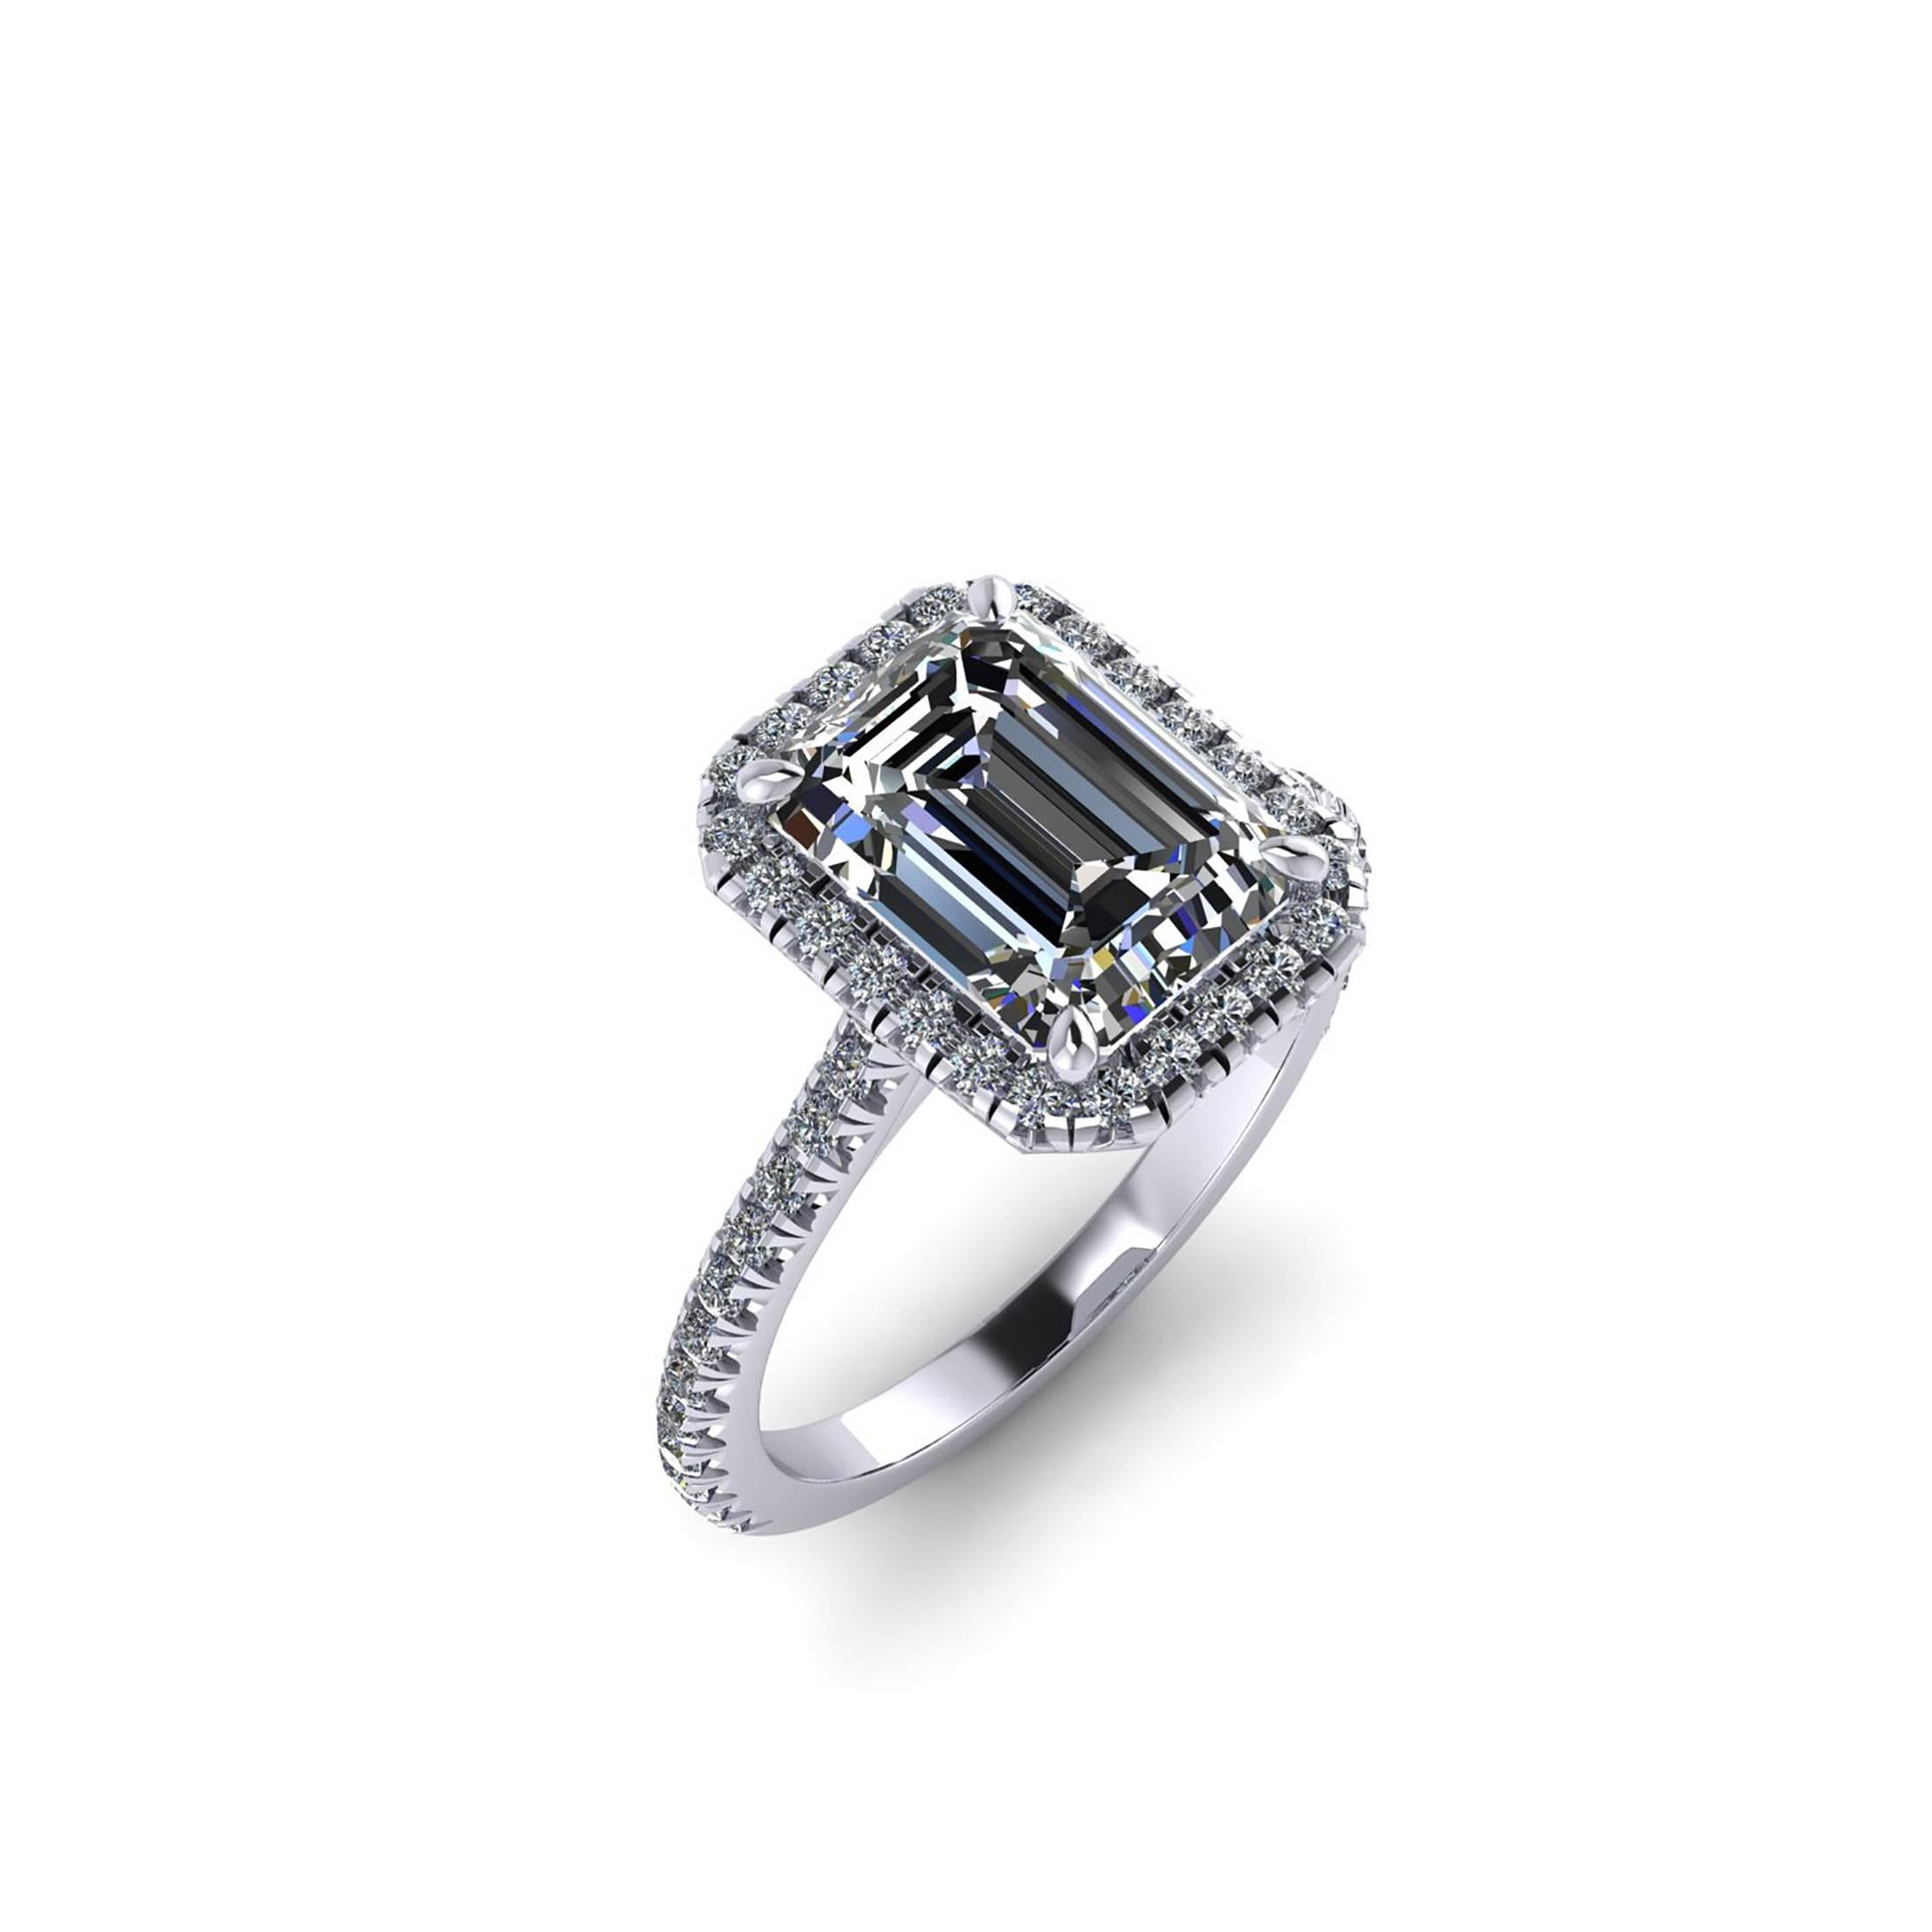 Ferrucci GIA Certified 3.00 carat Emerald cut wonderful diamond, F color, VS2 clarity,  in a hand made Platinum ring, with a halo of white diamonds and diamond of the shank, hand set cut-down style for enhancing to the maximum the reflection of the